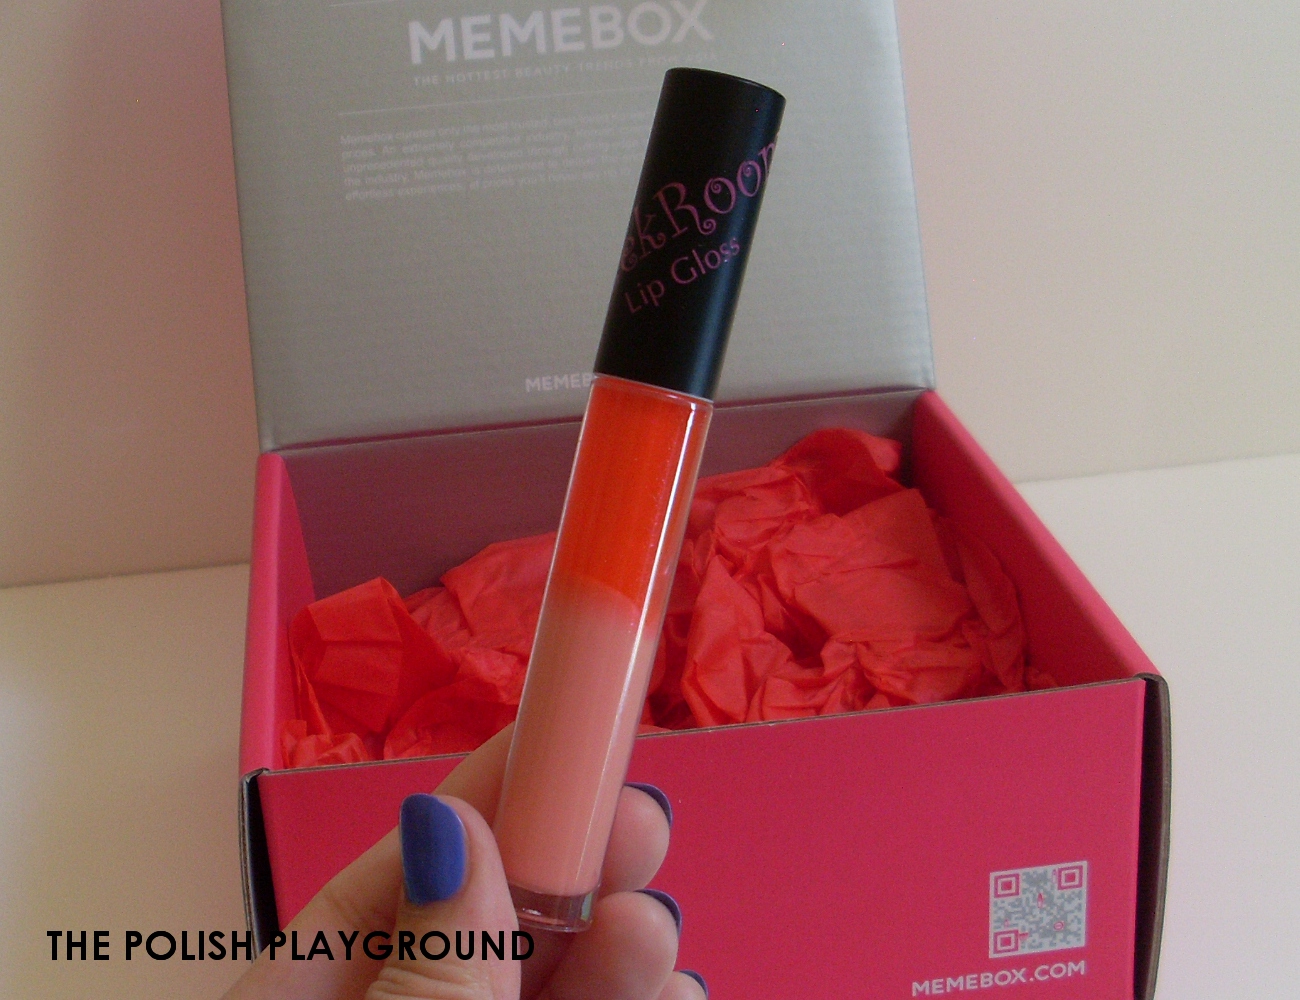 Memebox Colorbox #1 Red Unboxing - Cheek Room Two Color Lip Gloss #6 Red